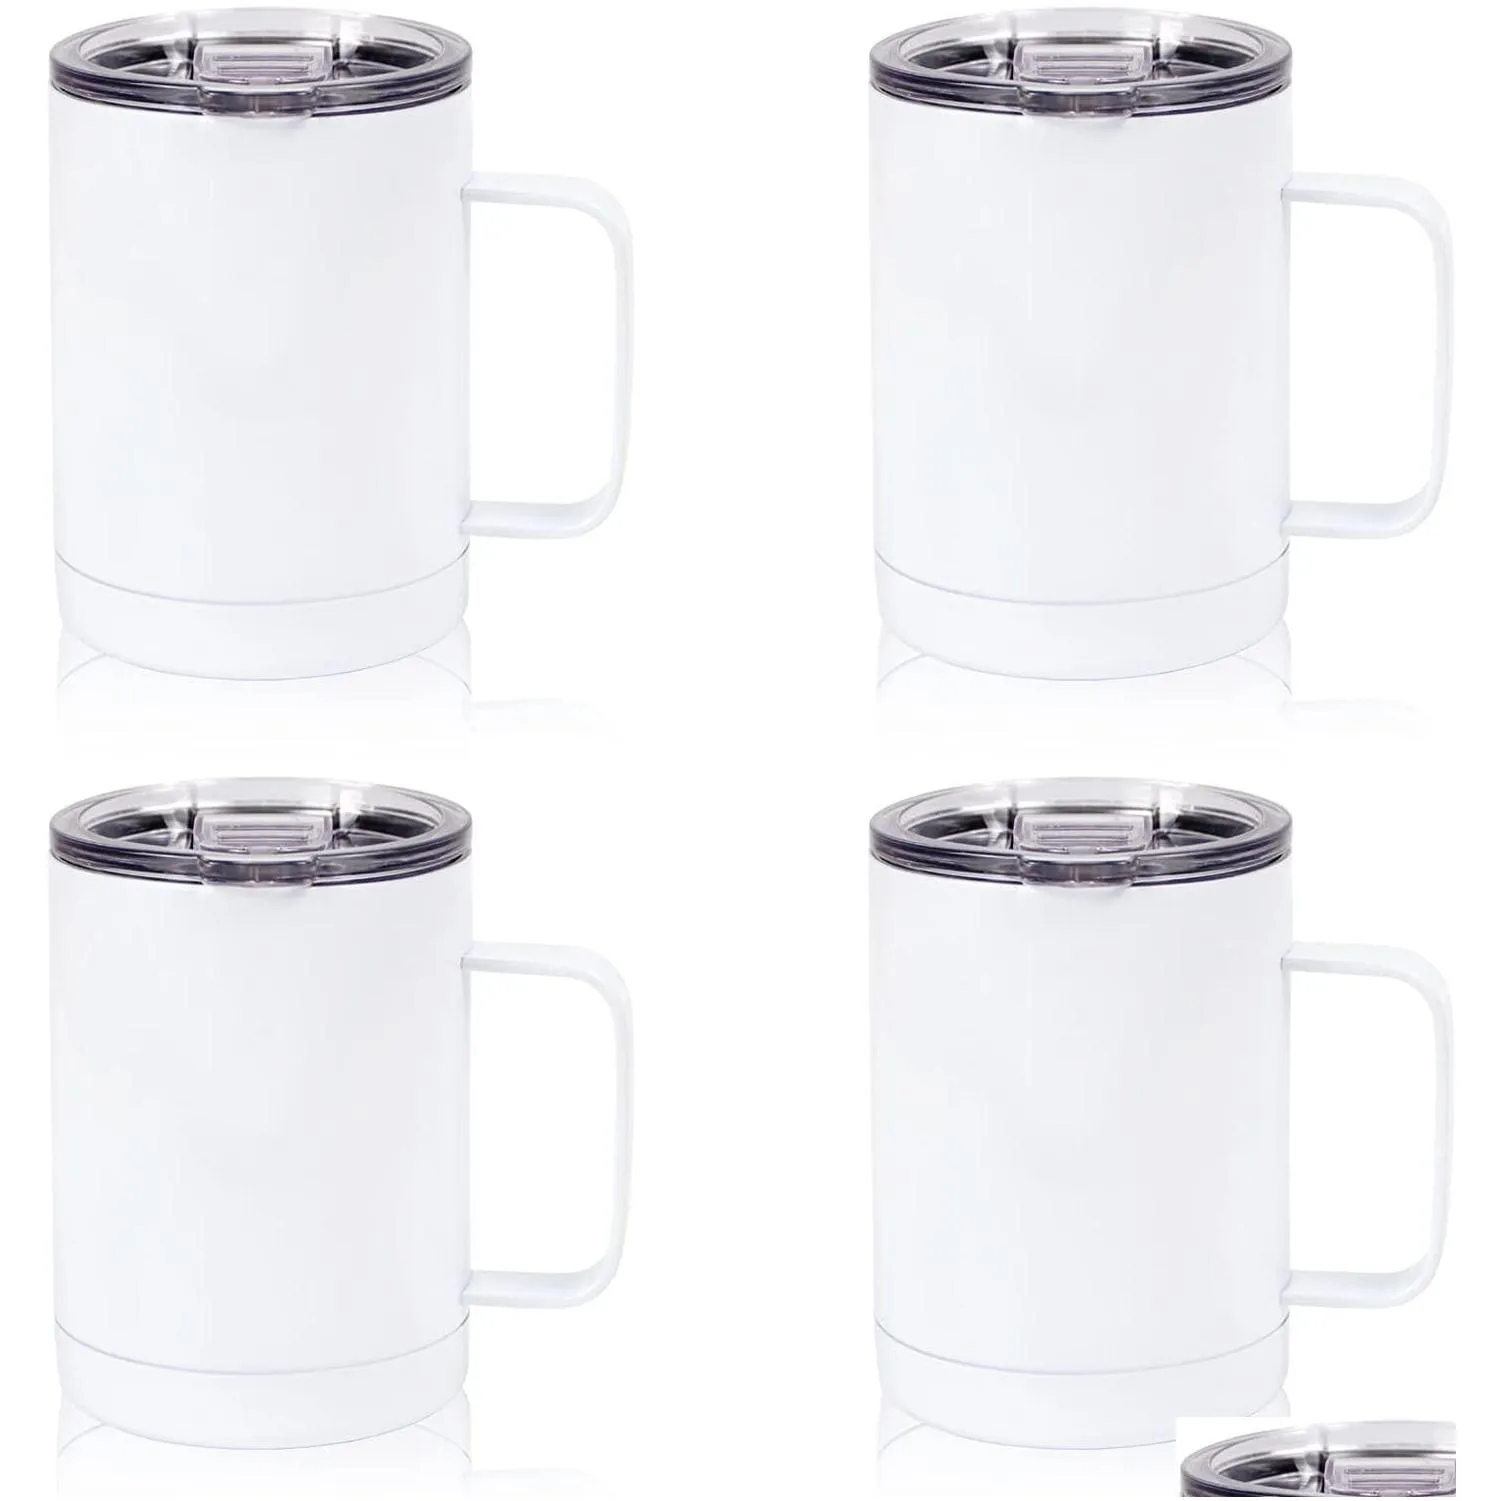 12oz coffee tea mugs with handle stainless steel insulated travel tumblers with sliding lid double wall vacuum camping cup for hot cold